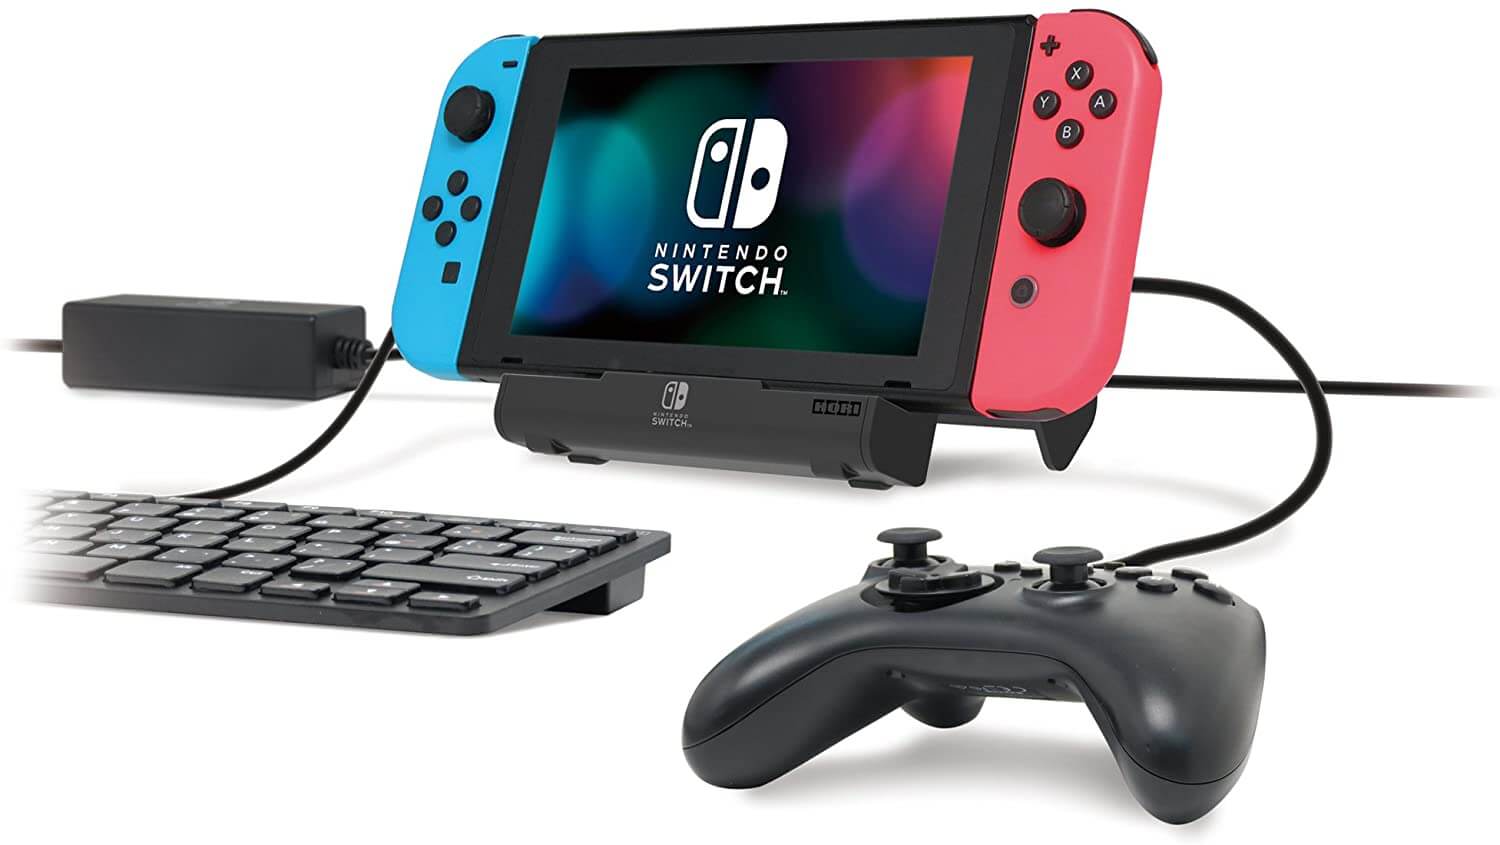 Nintendo Switch charging stand